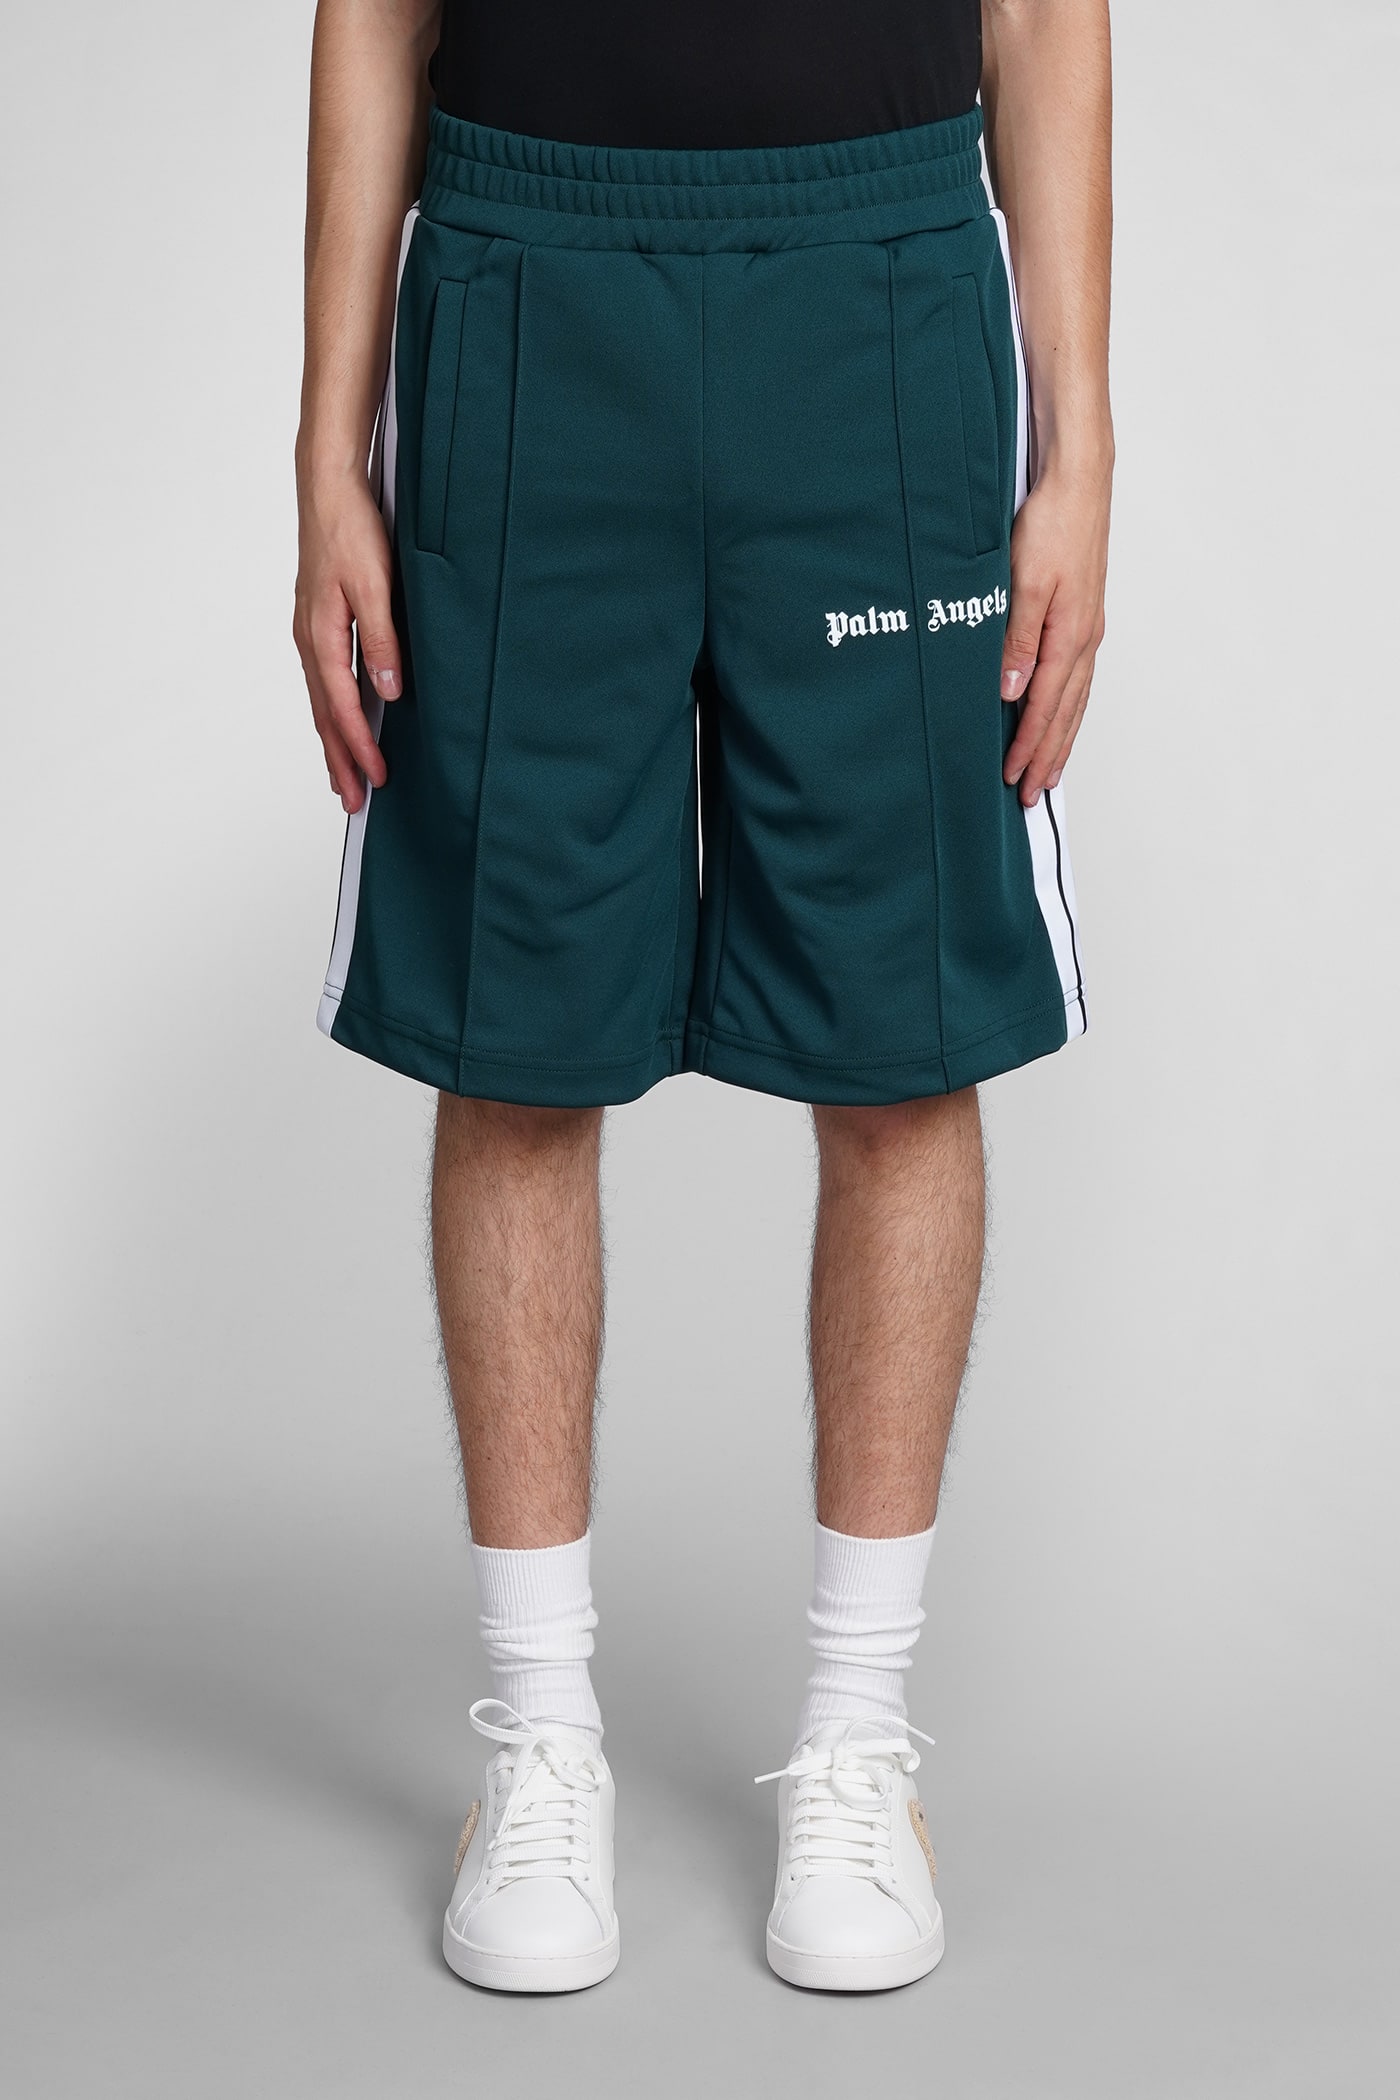 Palm Angels Shorts In Green Polyester